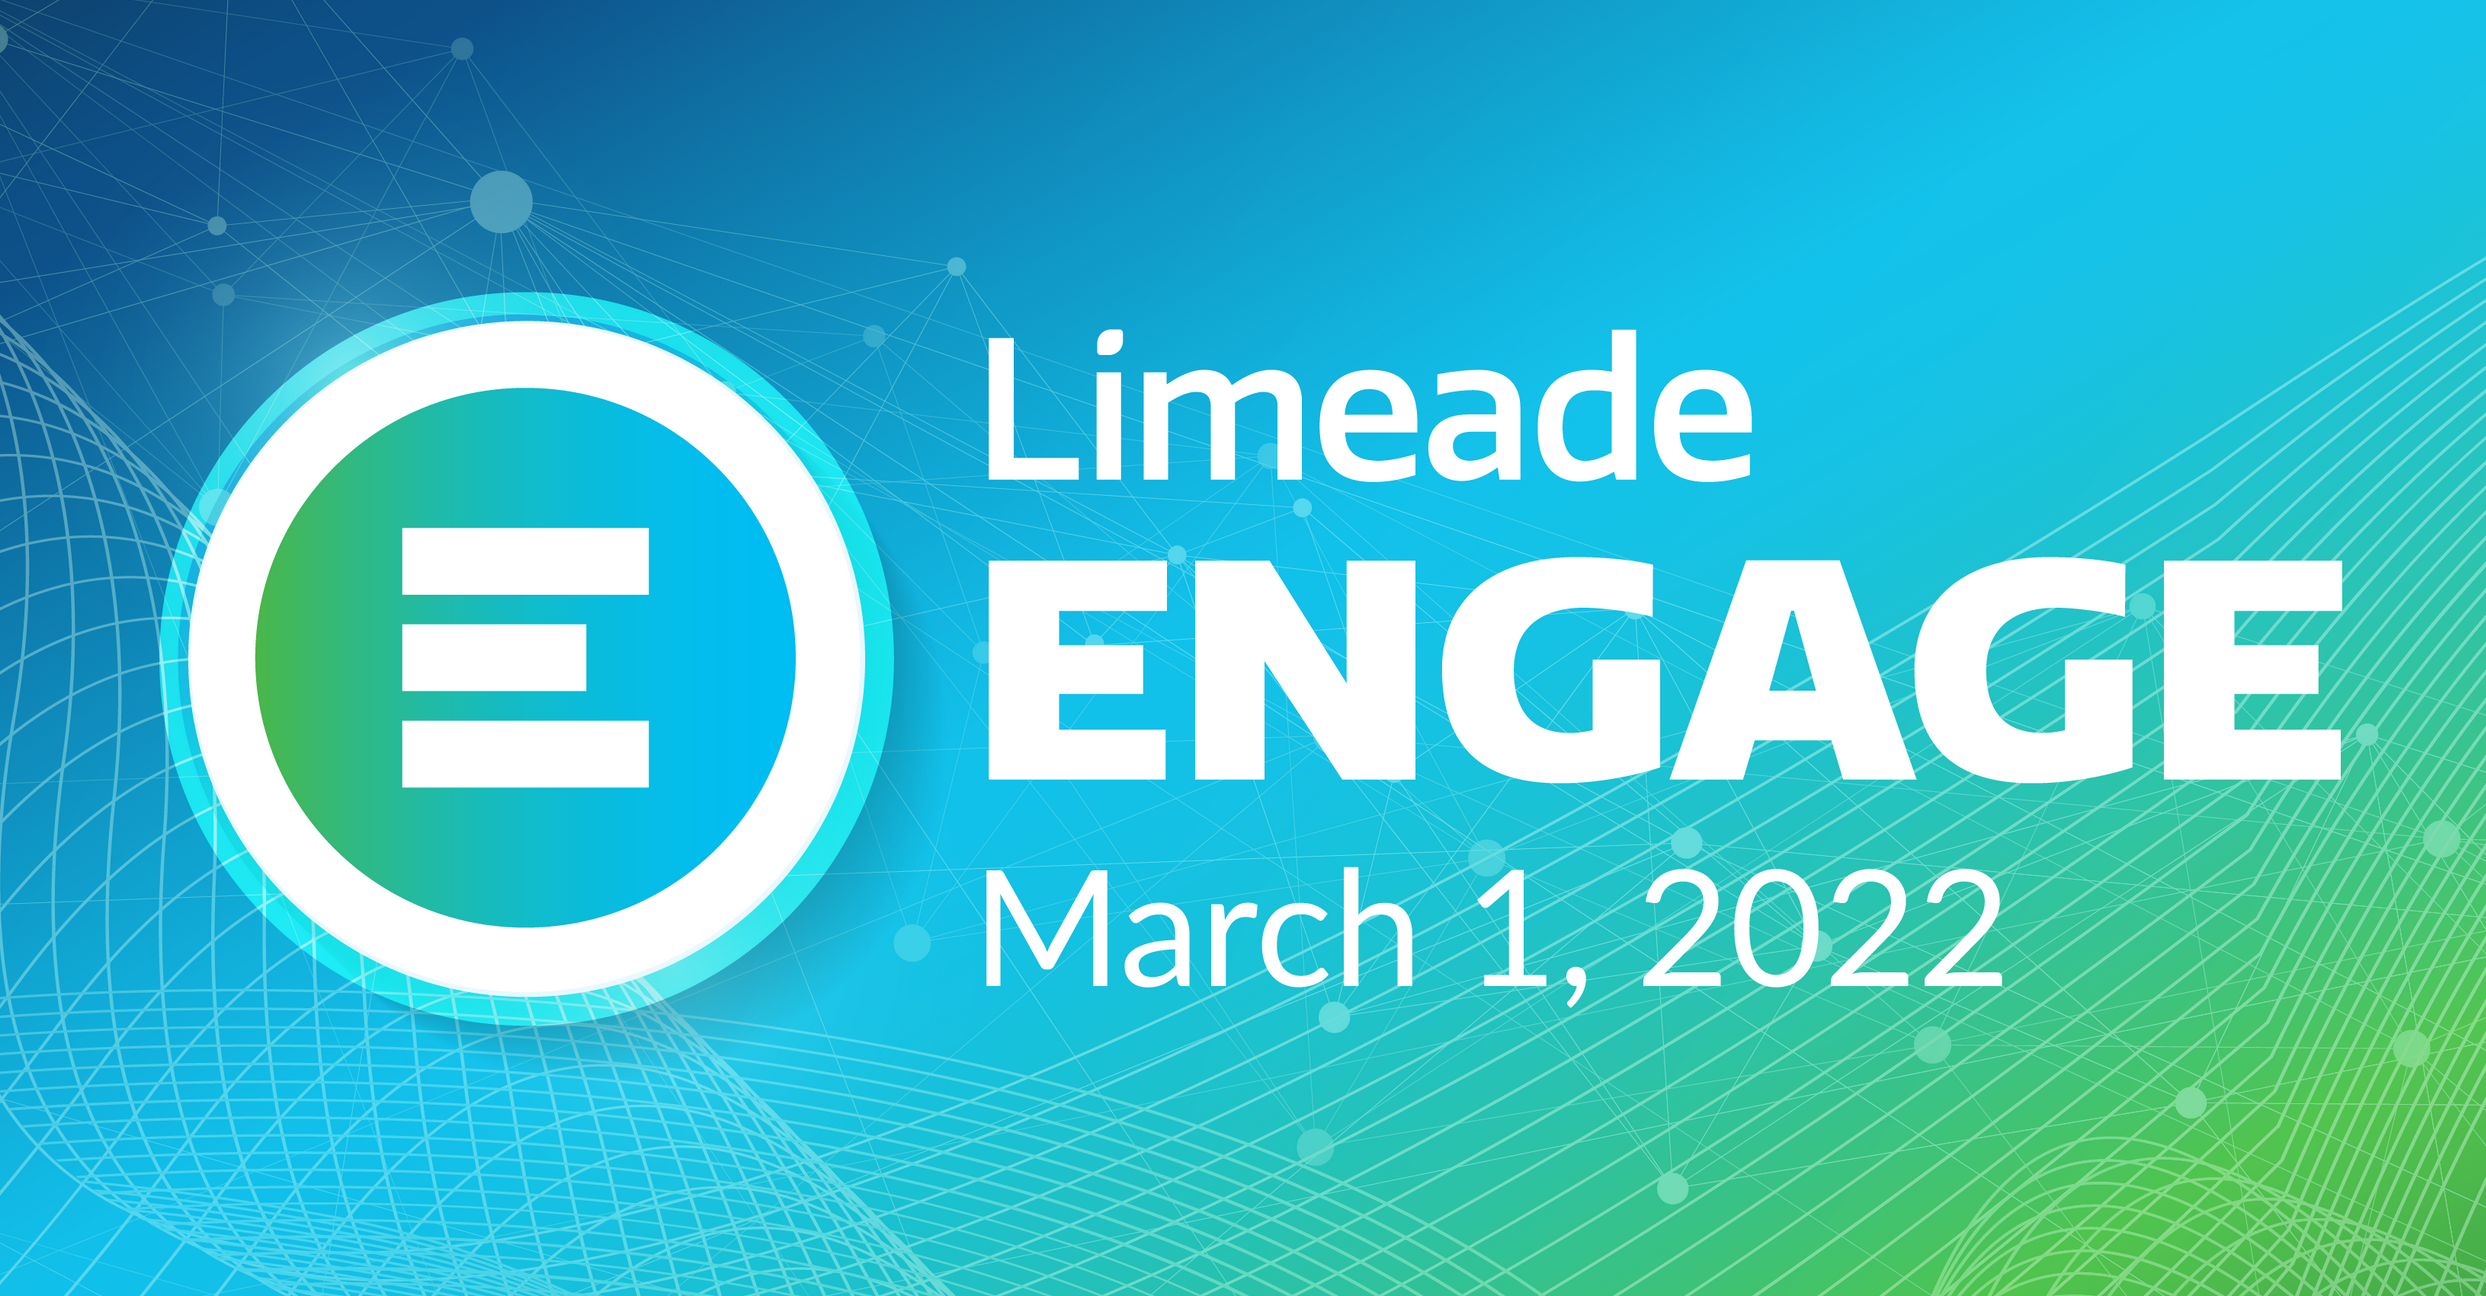 Limeade Engage March 1, 2022